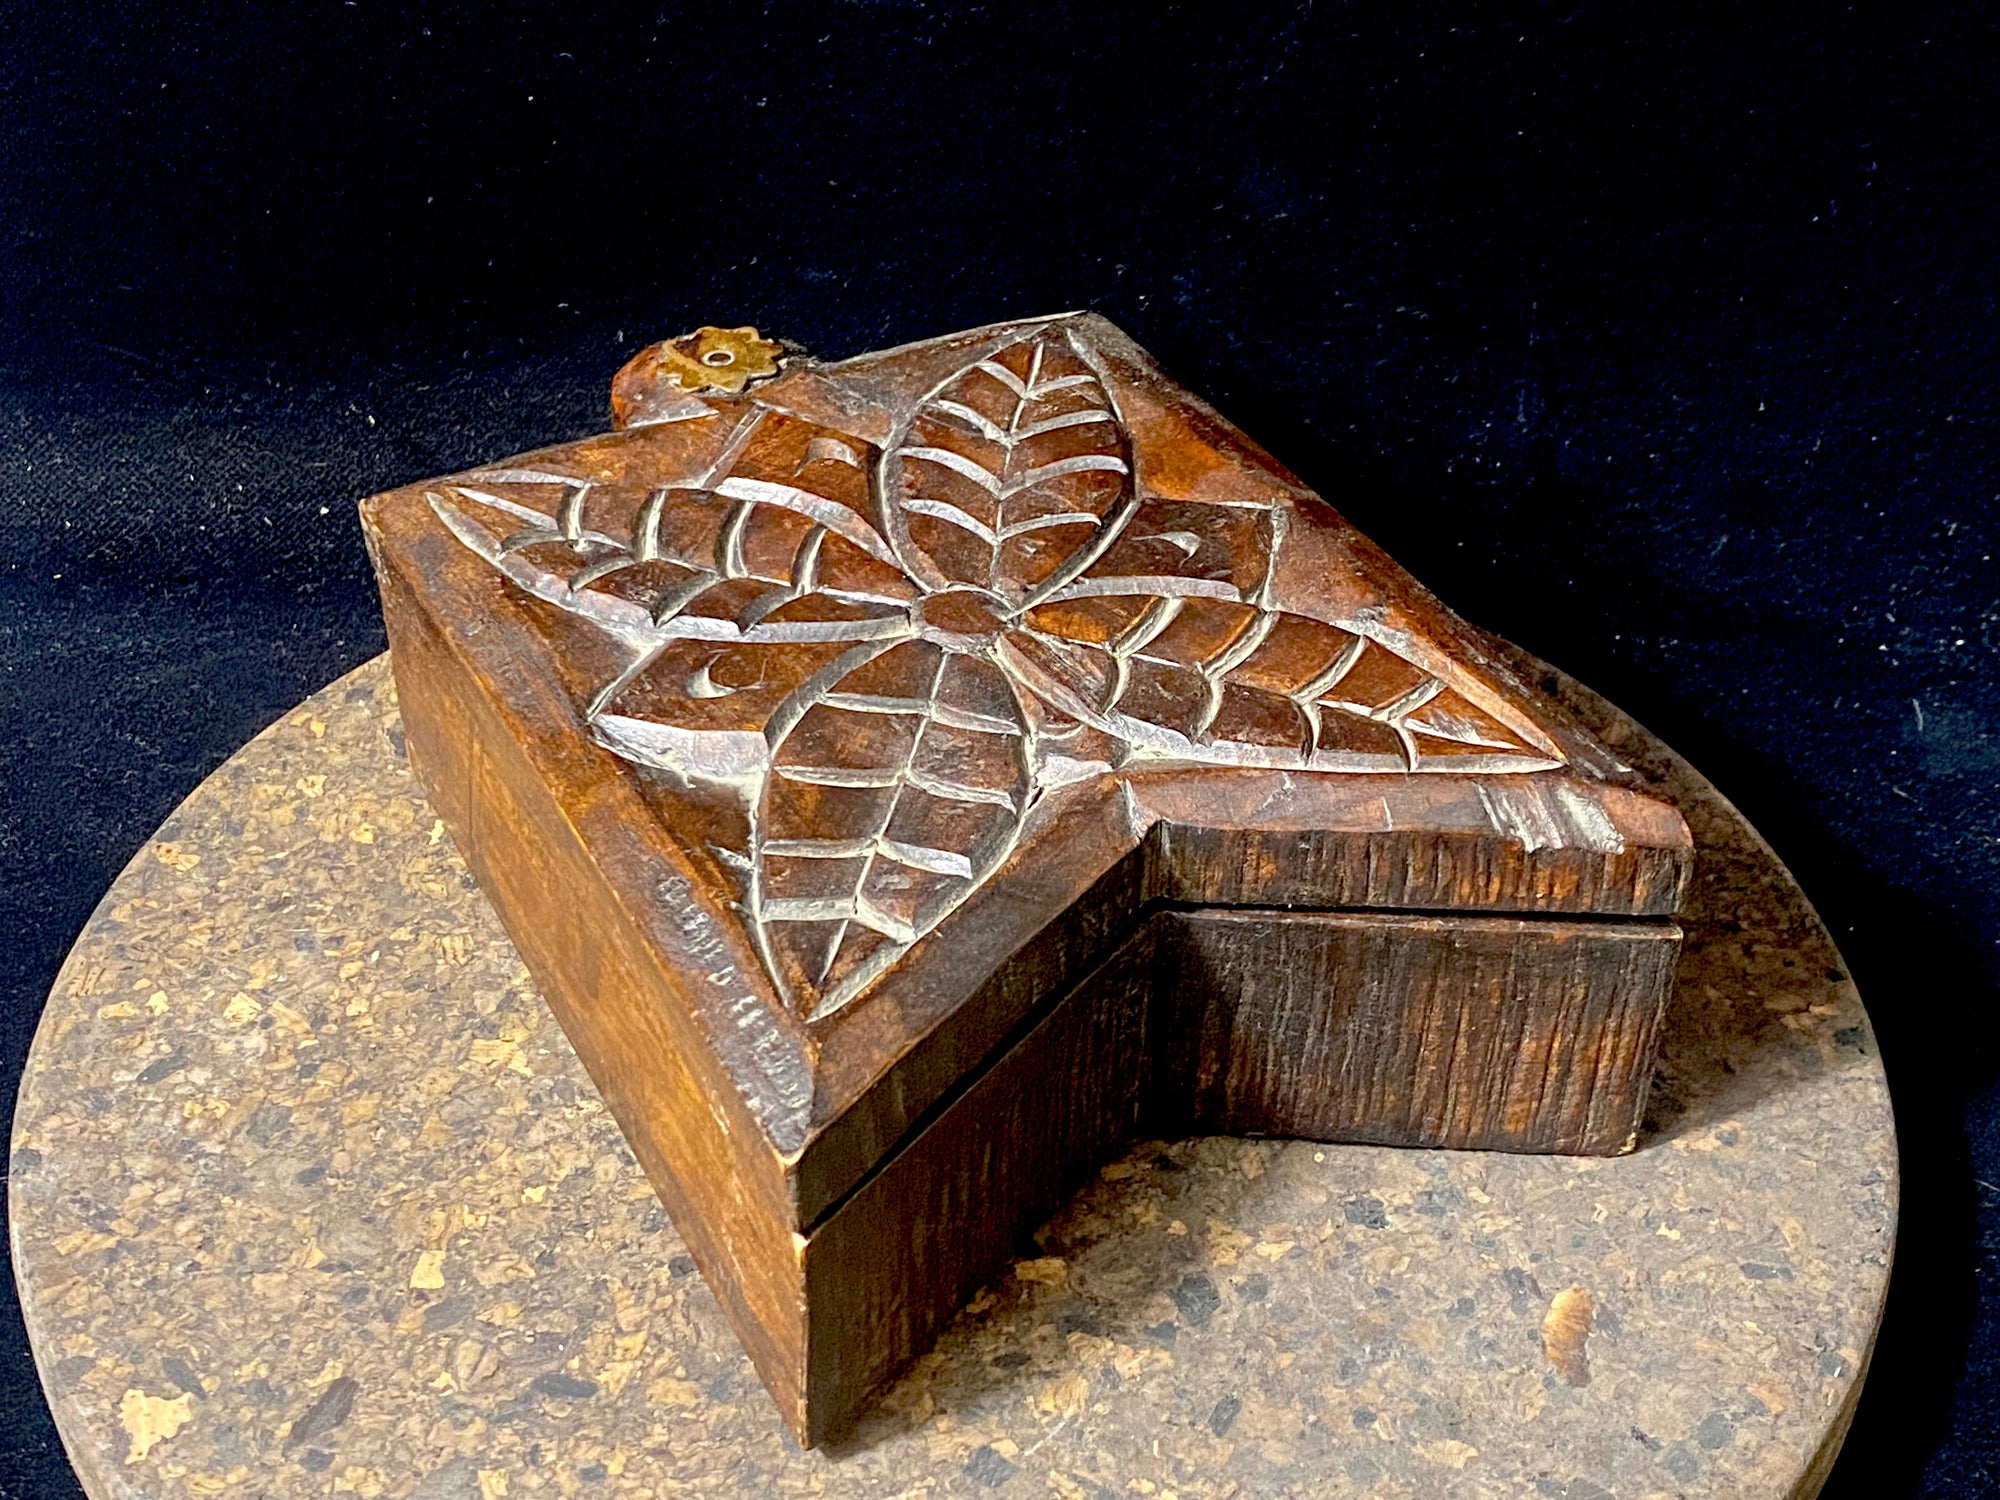 Indian marsala box with carved top and swivel lid. Made from recycled Indian rosewood. Three compartments. This natural wood box make a lovely trinket box, key box, jewellery, watch or cufflink box. 1950s. Handmade in northern India. Measurements length 20 cm x width 14 cm, height 6 cm.